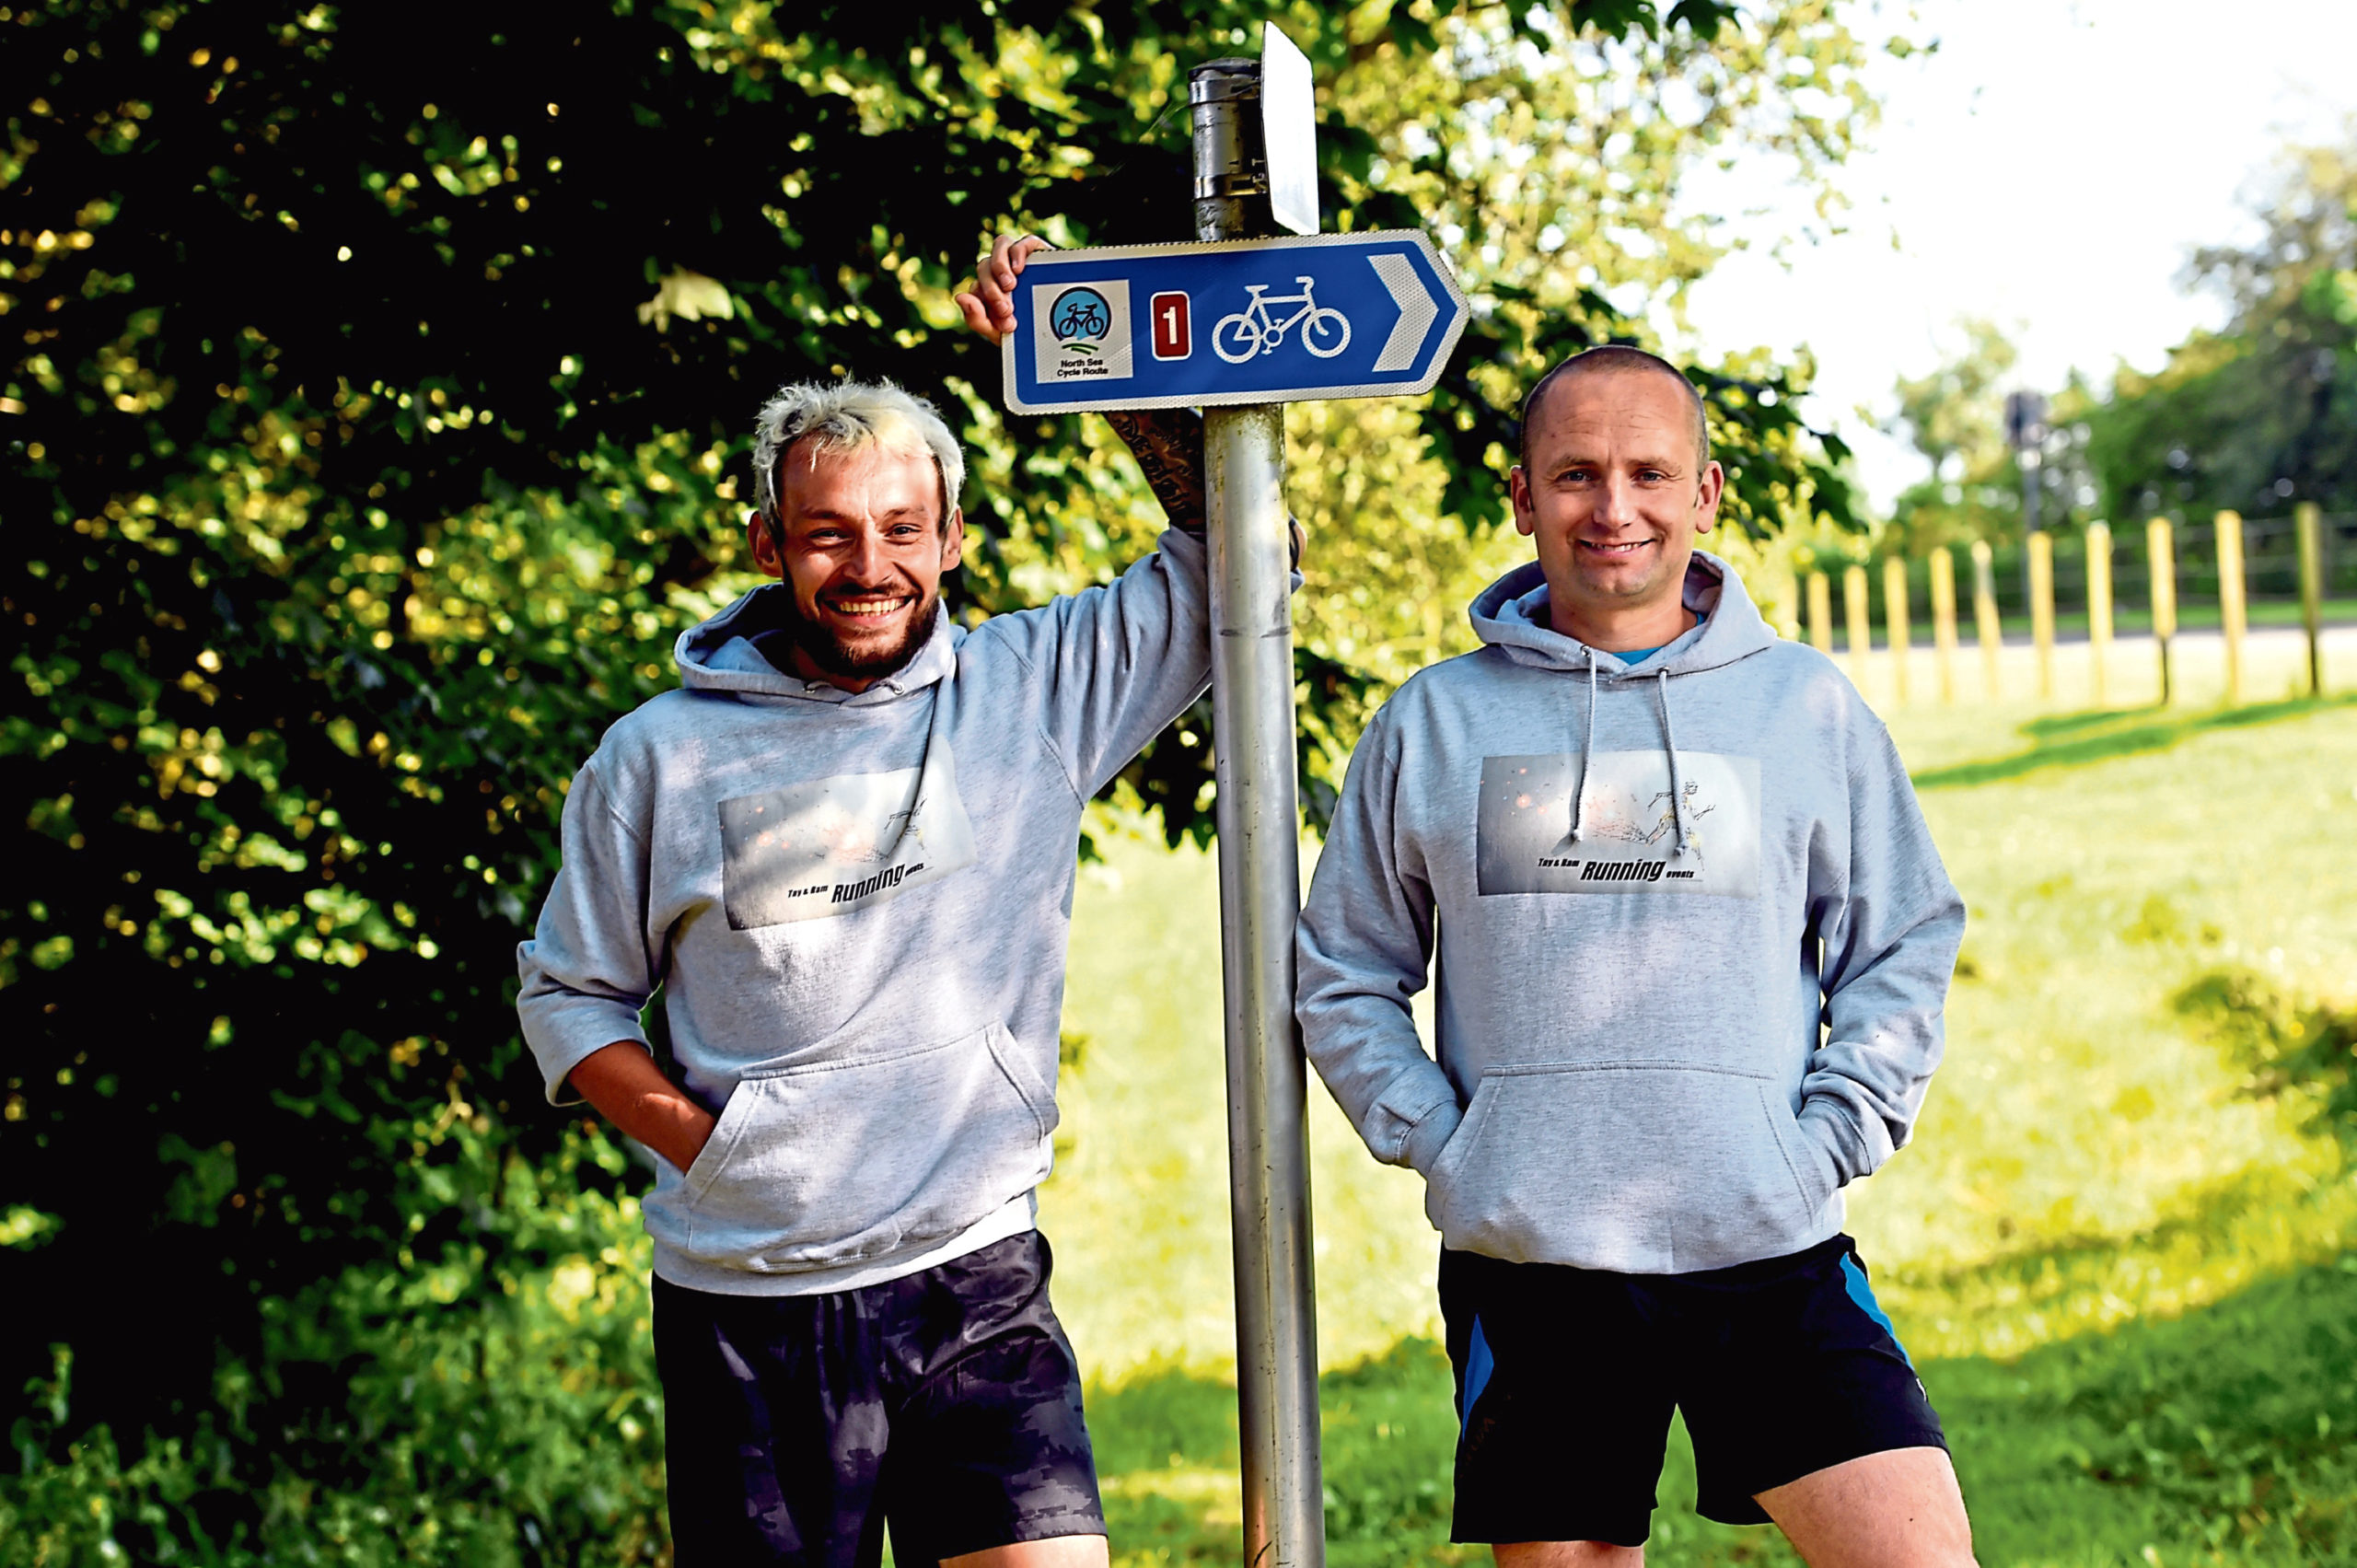 North-east army veterans Gavin Taylor (left) and Kevin Watson, who are involved in organising the new event, pictured on the former railway line near Auchnagatt.
Picture by Colin Rennie